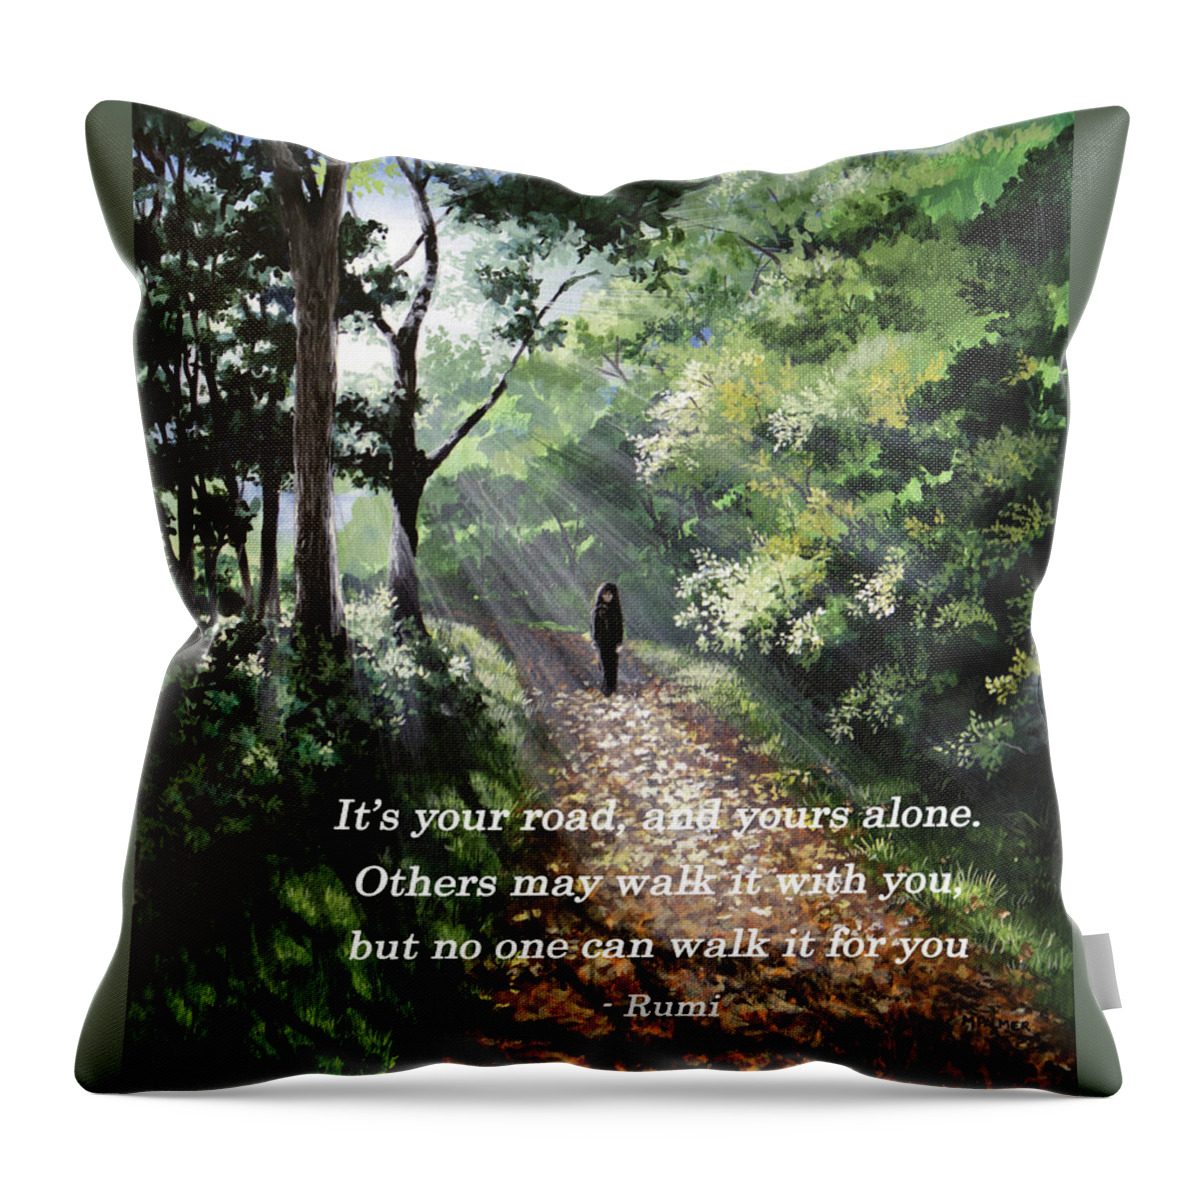 Sunrise Throw Pillow featuring the painting It's Your Road by Mary Palmer